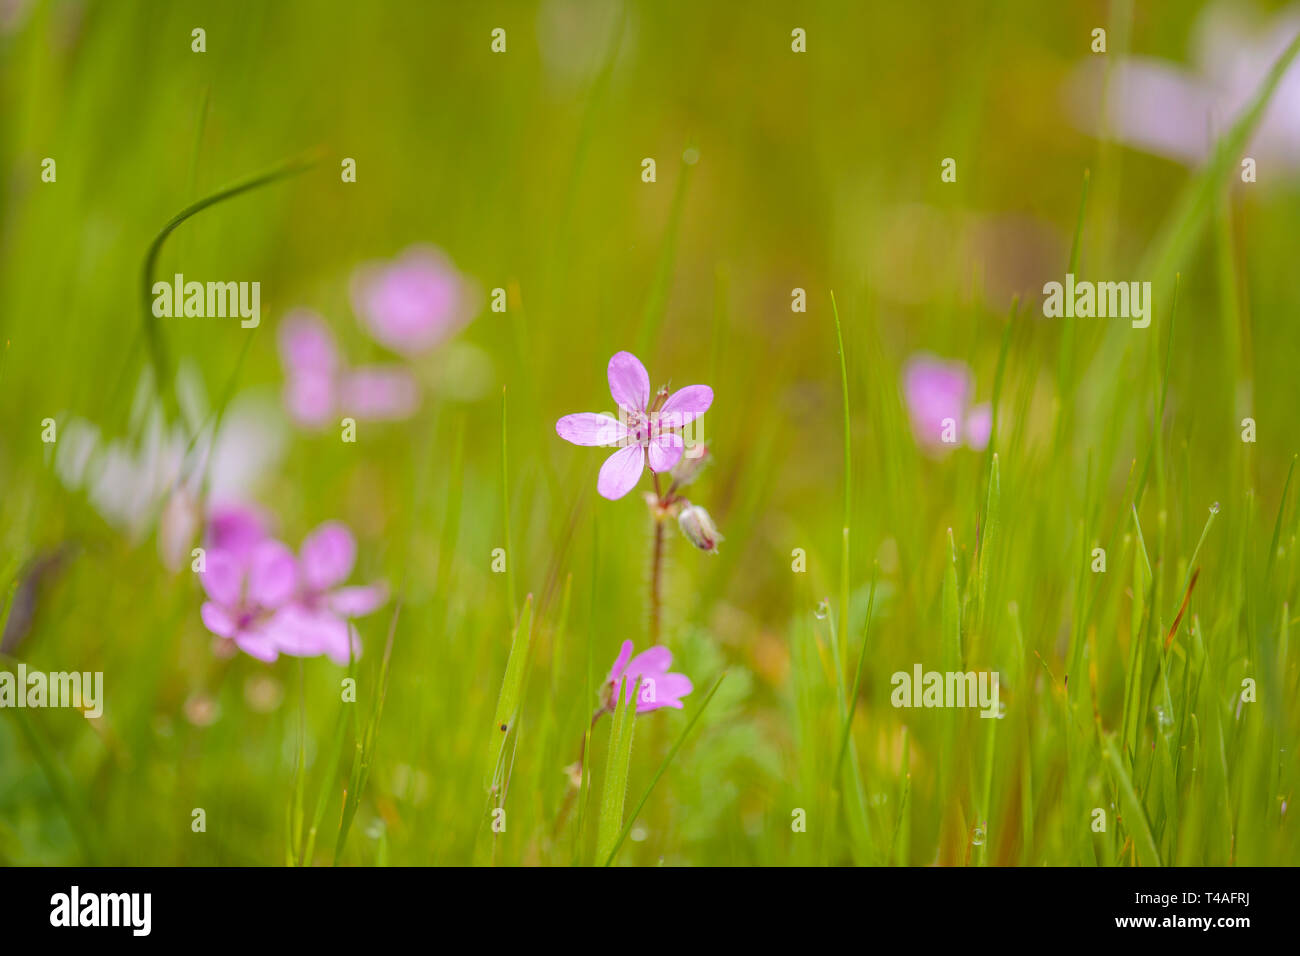 Flora of Gran Canaria - pale pink flowers of Erodium in green grass Stock Photo